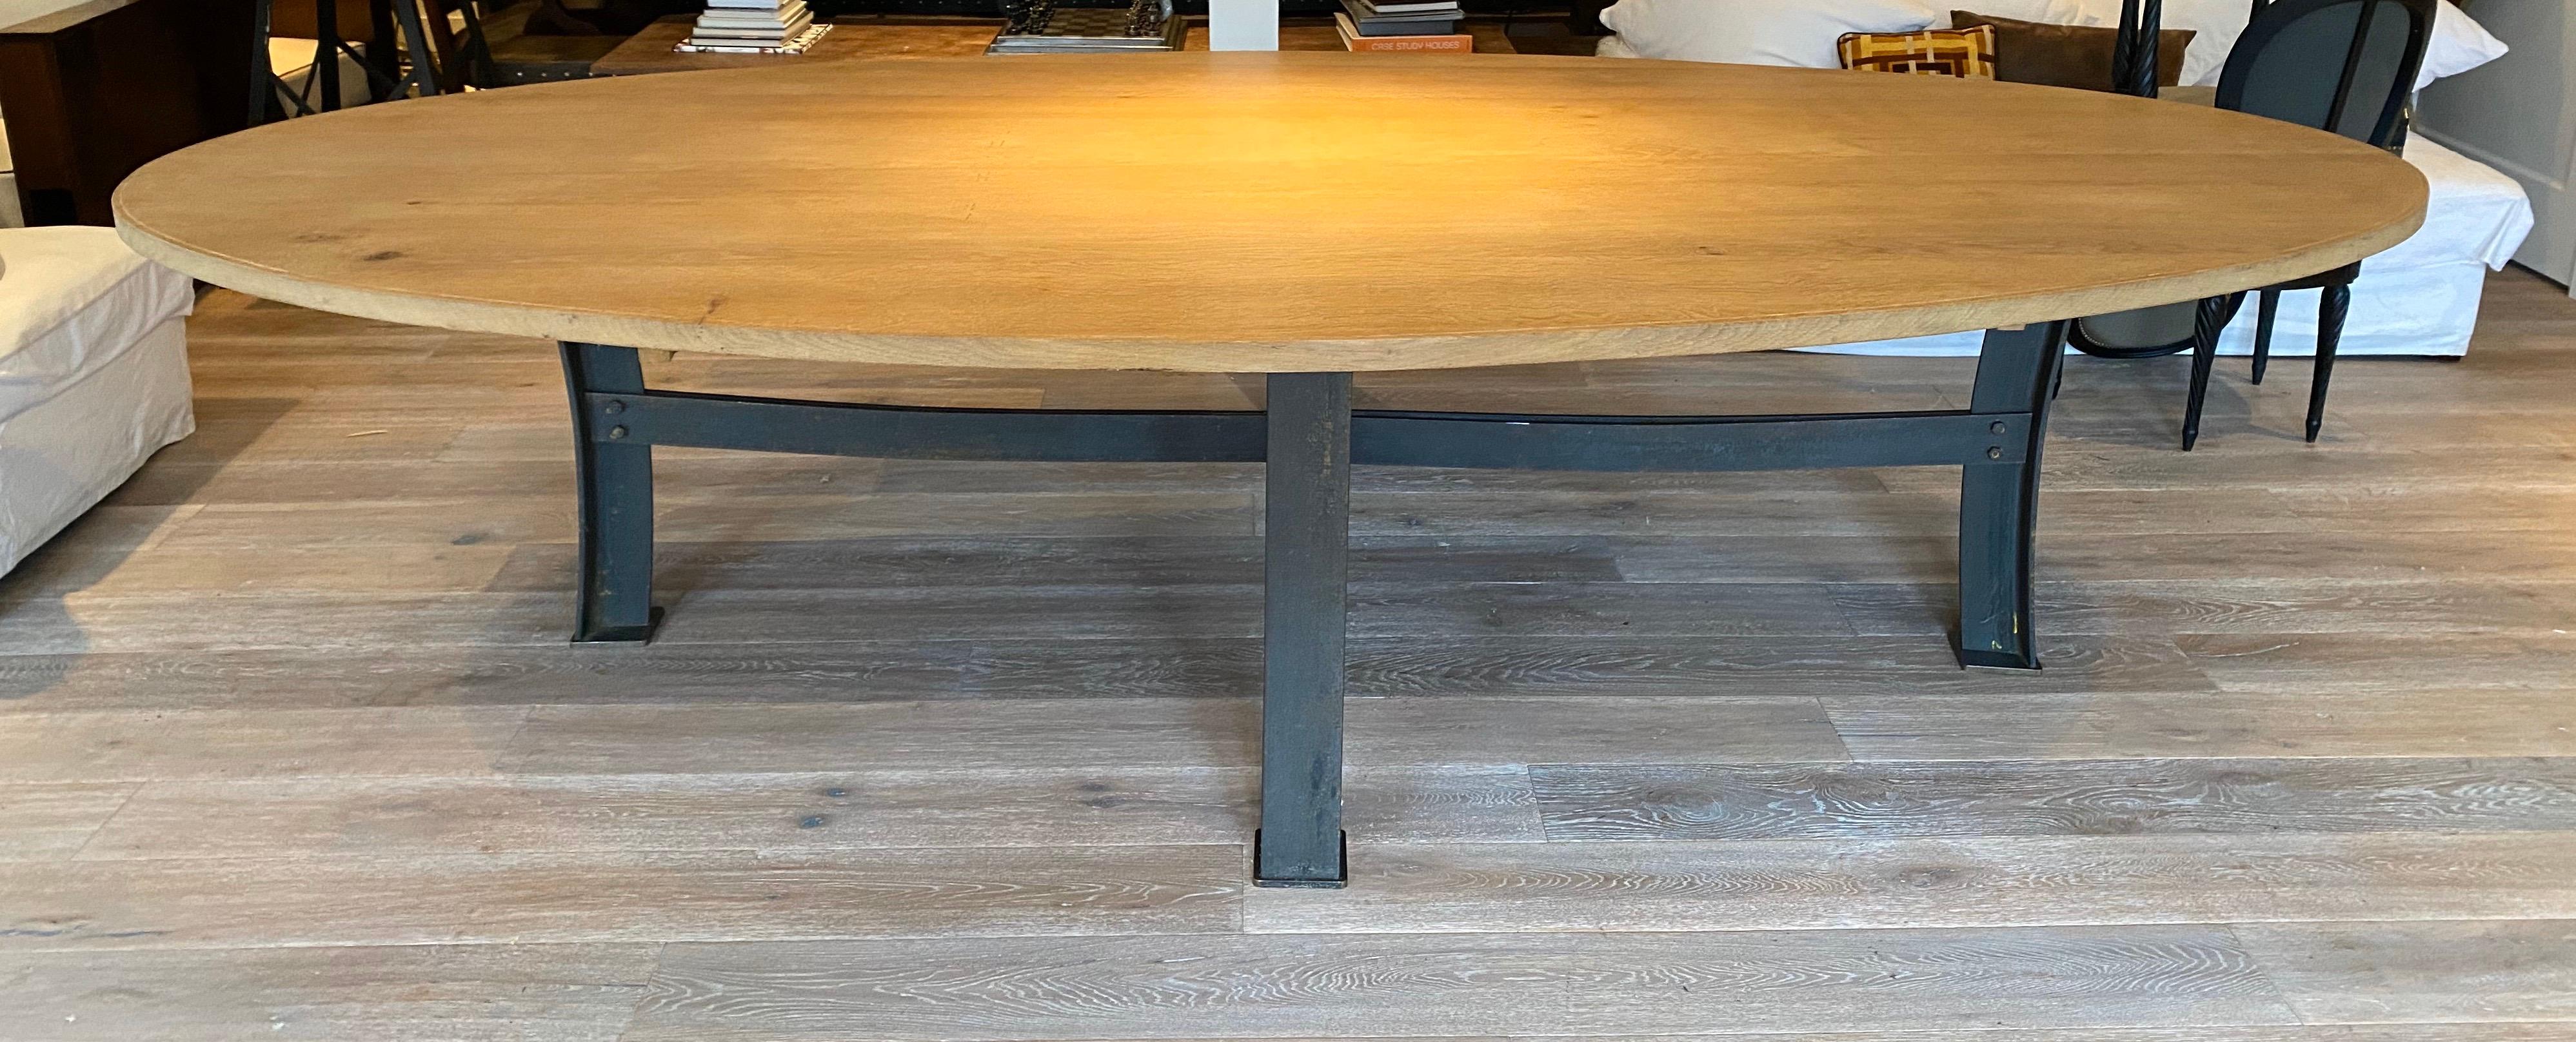 A stunning solid oak oval dining table with steel beam base. Solid and heavy construction. The table comfortable seats 12-14 people. From a New York City townhouse designed by French designer Olivier Gagnère.